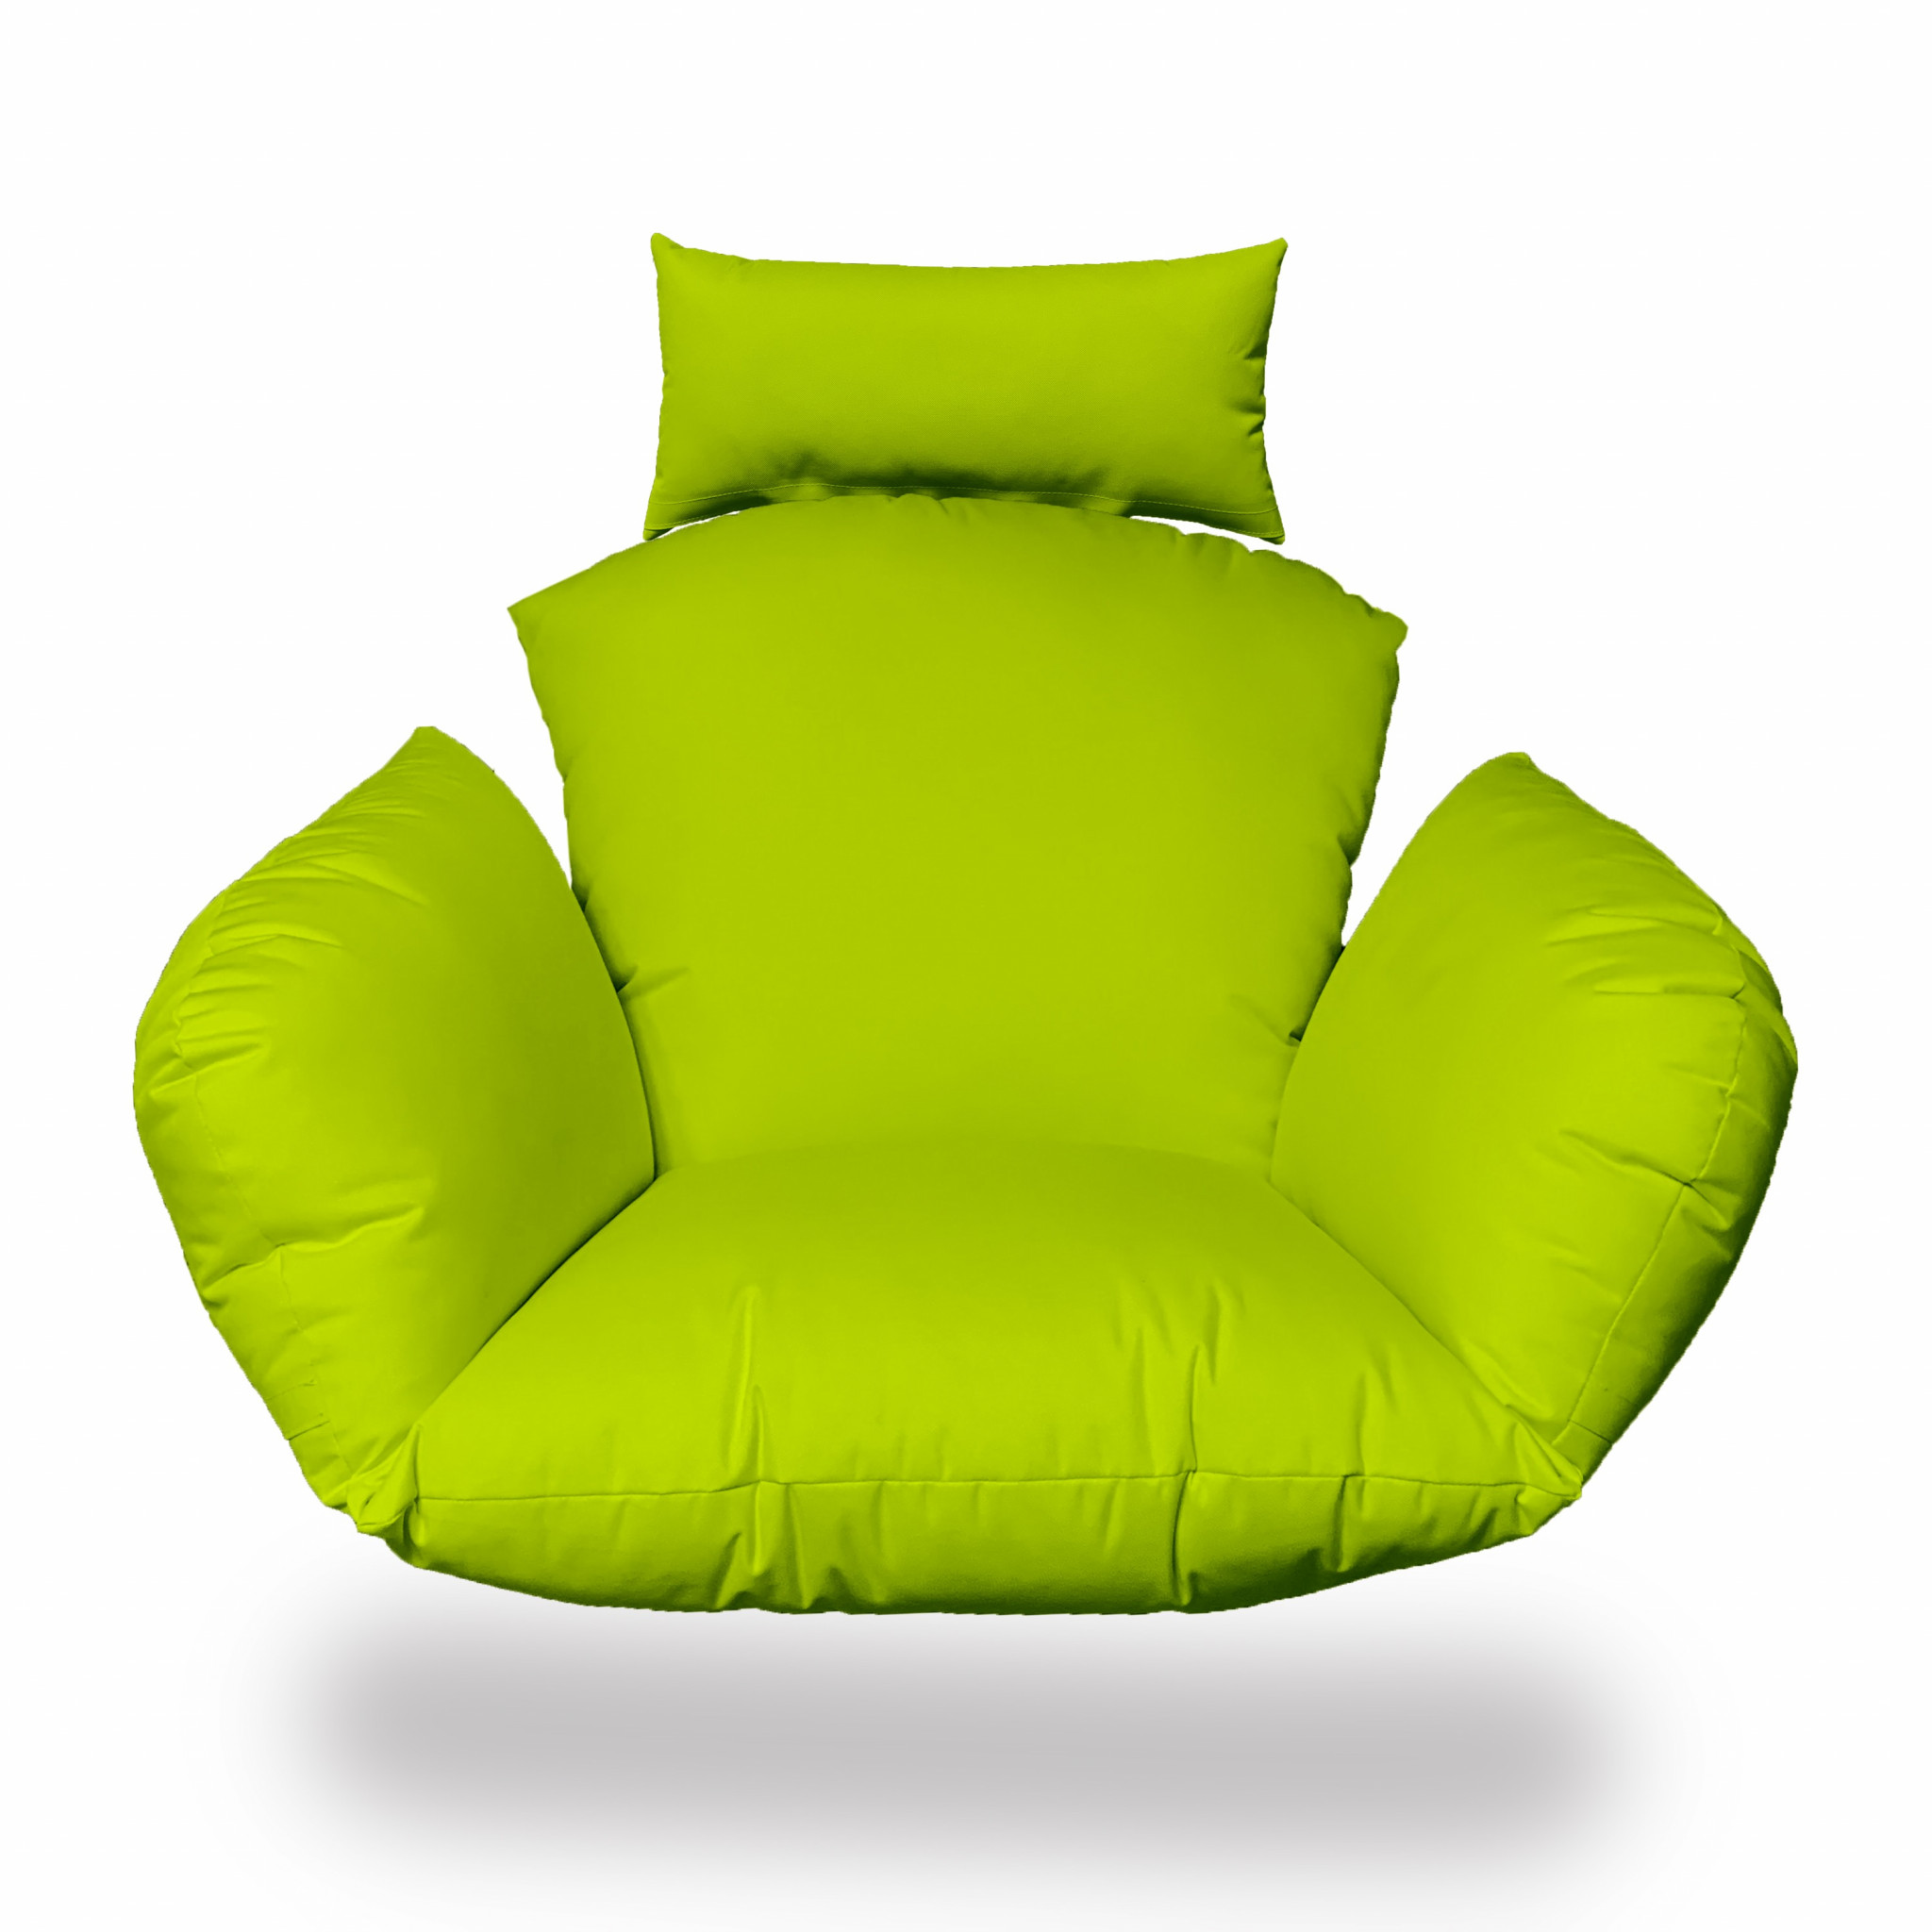 Primo Neon Green Indoor Outdoor Replacement Cushion for Egg Chair-472991-1